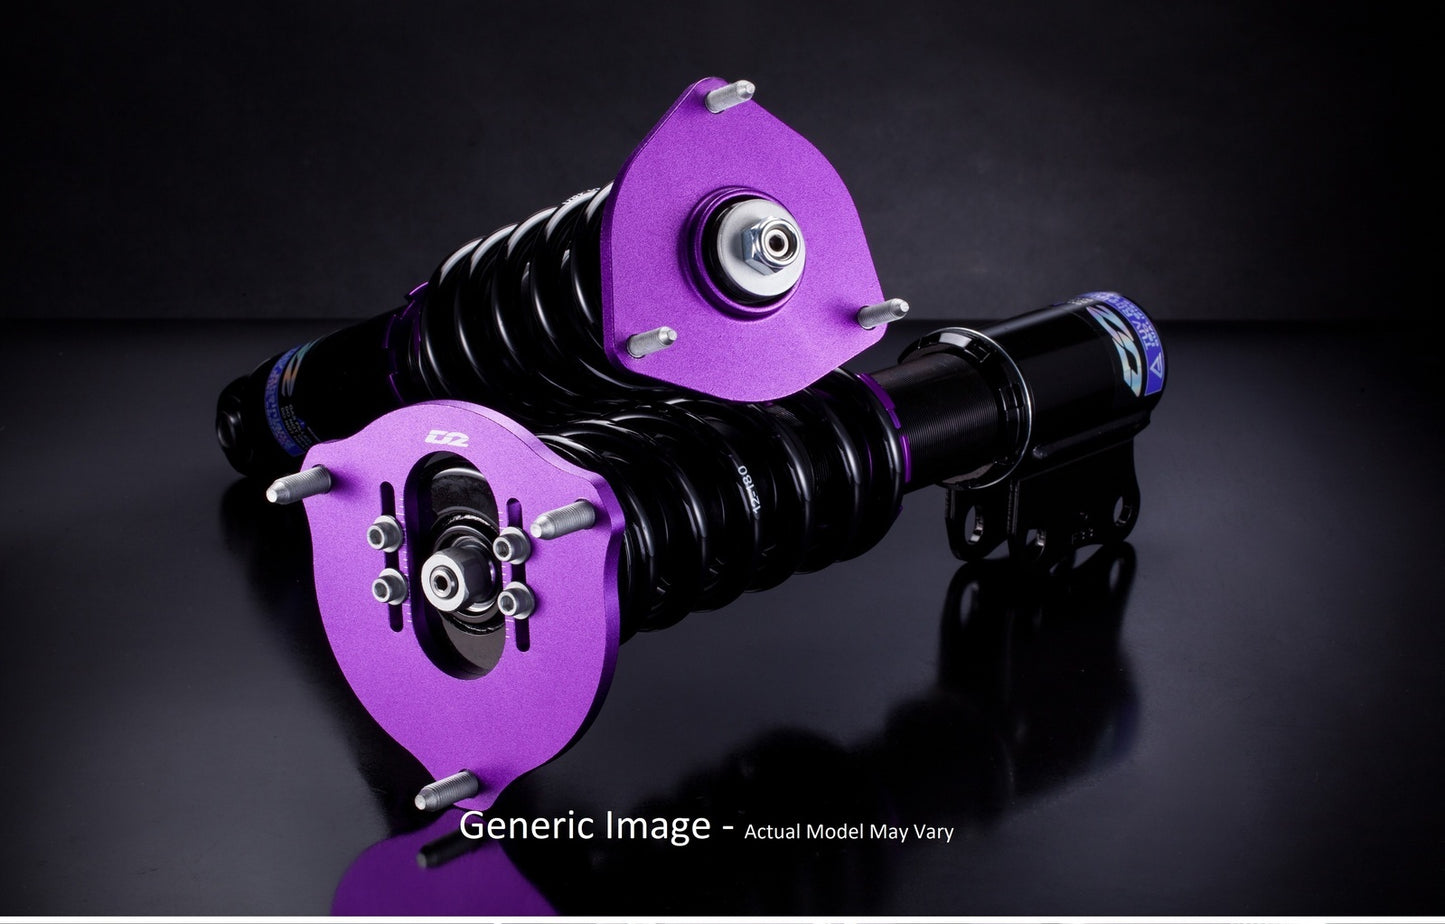 D2 Racing Pro Street Series Coilover Kit - Veloster 11-17